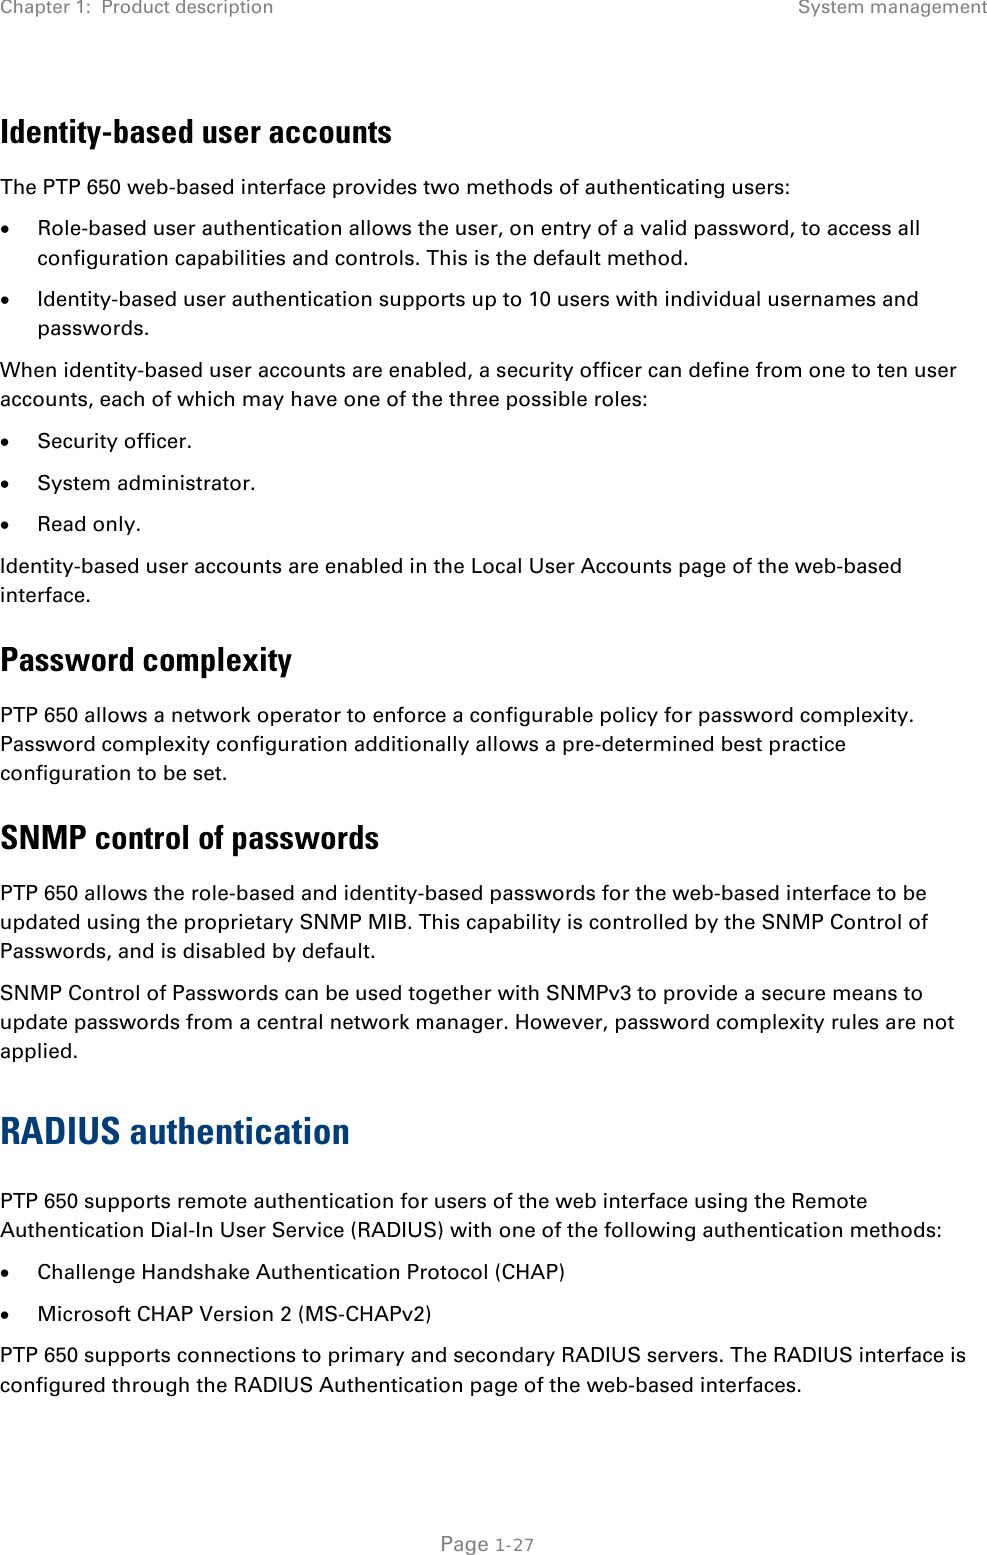 Chapter 1:  Product description System management  Identity-based user accounts The PTP 650 web-based interface provides two methods of authenticating users: • Role-based user authentication allows the user, on entry of a valid password, to access all configuration capabilities and controls. This is the default method. • Identity-based user authentication supports up to 10 users with individual usernames and passwords. When identity-based user accounts are enabled, a security officer can define from one to ten user accounts, each of which may have one of the three possible roles: • Security officer. • System administrator. • Read only. Identity-based user accounts are enabled in the Local User Accounts page of the web-based interface. Password complexity PTP 650 allows a network operator to enforce a configurable policy for password complexity. Password complexity configuration additionally allows a pre-determined best practice configuration to be set. SNMP control of passwords PTP 650 allows the role-based and identity-based passwords for the web-based interface to be updated using the proprietary SNMP MIB. This capability is controlled by the SNMP Control of Passwords, and is disabled by default. SNMP Control of Passwords can be used together with SNMPv3 to provide a secure means to update passwords from a central network manager. However, password complexity rules are not applied. RADIUS authentication PTP 650 supports remote authentication for users of the web interface using the Remote Authentication Dial-In User Service (RADIUS) with one of the following authentication methods: • Challenge Handshake Authentication Protocol (CHAP) • Microsoft CHAP Version 2 (MS-CHAPv2) PTP 650 supports connections to primary and secondary RADIUS servers. The RADIUS interface is configured through the RADIUS Authentication page of the web-based interfaces.  Page 1-27 